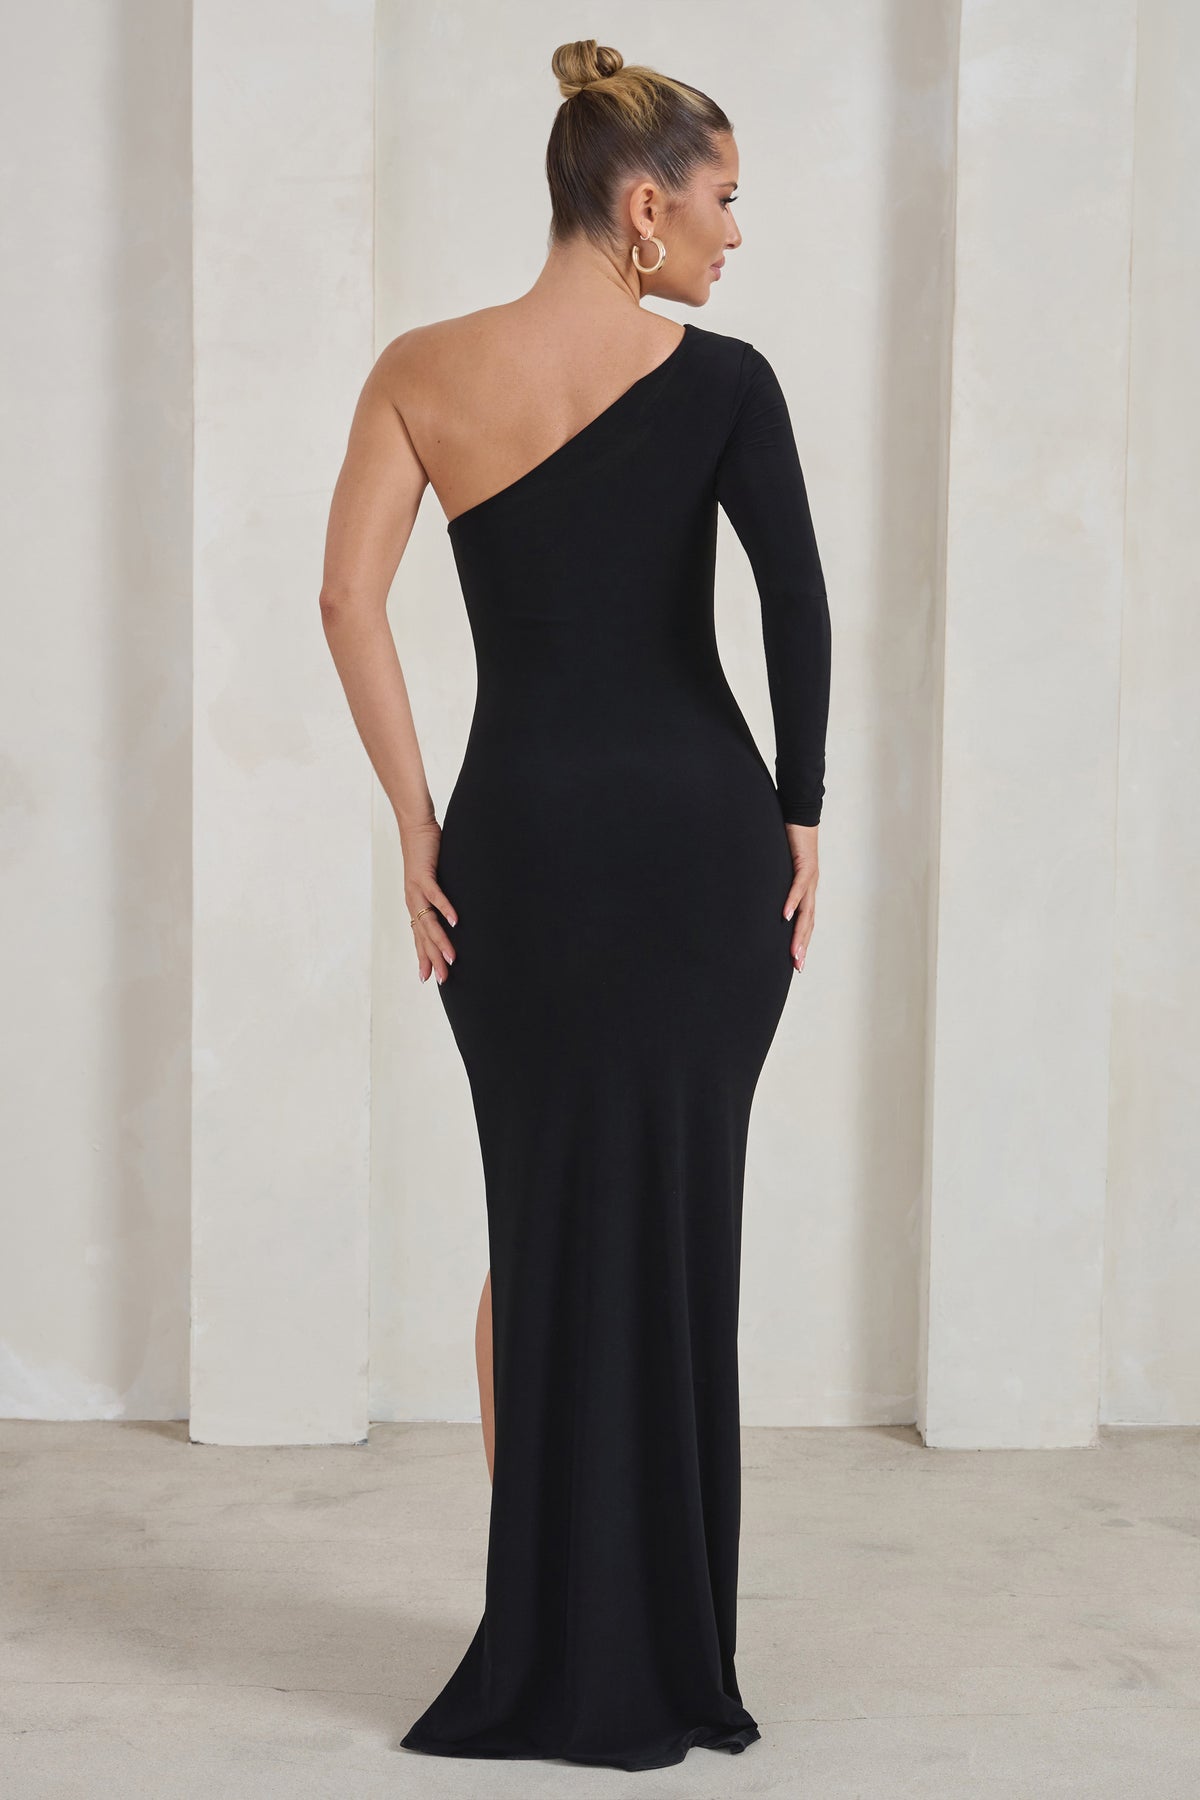 Club L London Dressing Up | Chocolate Brown One Shoulder Maxi Dress with Open Back Detail US 12 / Chocolate